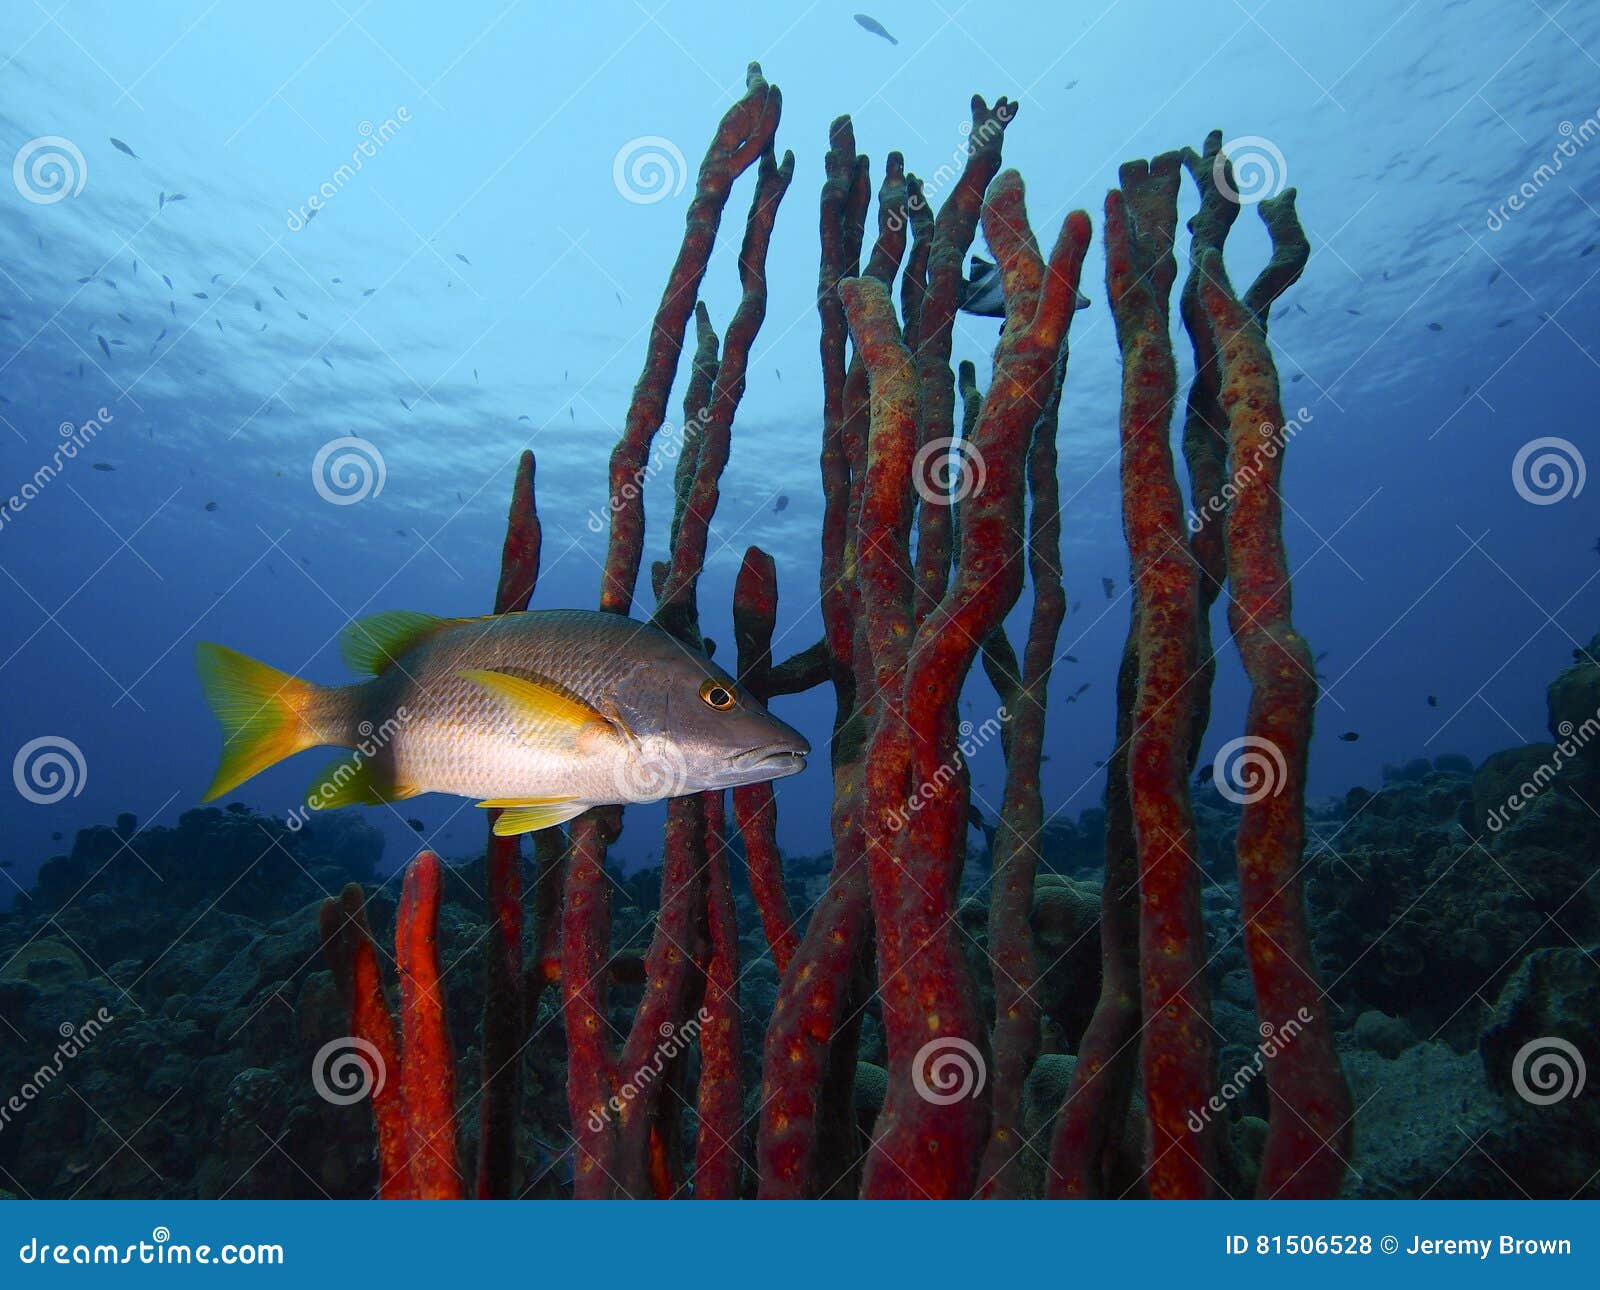 a schoolmaster lurking in a thicket of red erect rope sponge, something special, bonaire